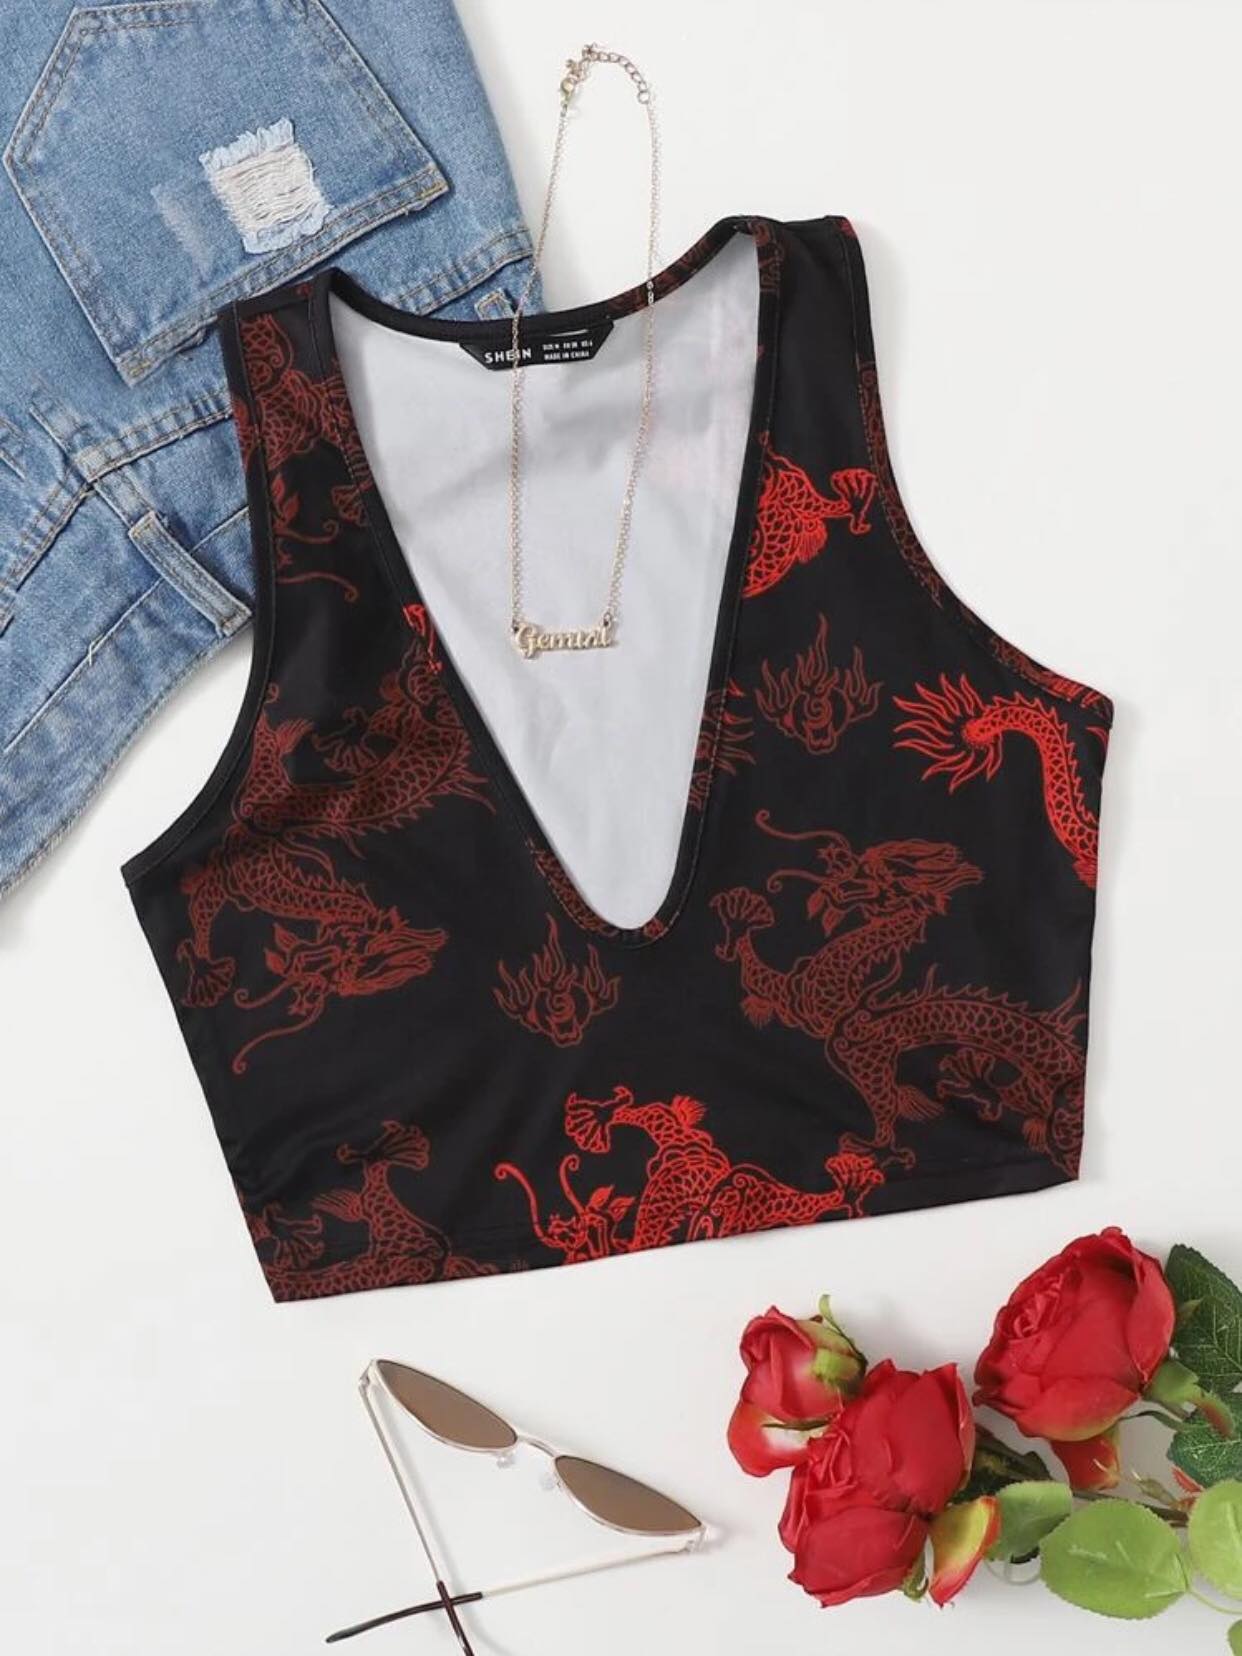 Shein Black And Red Chinese Dragon Crop Top Women Large for